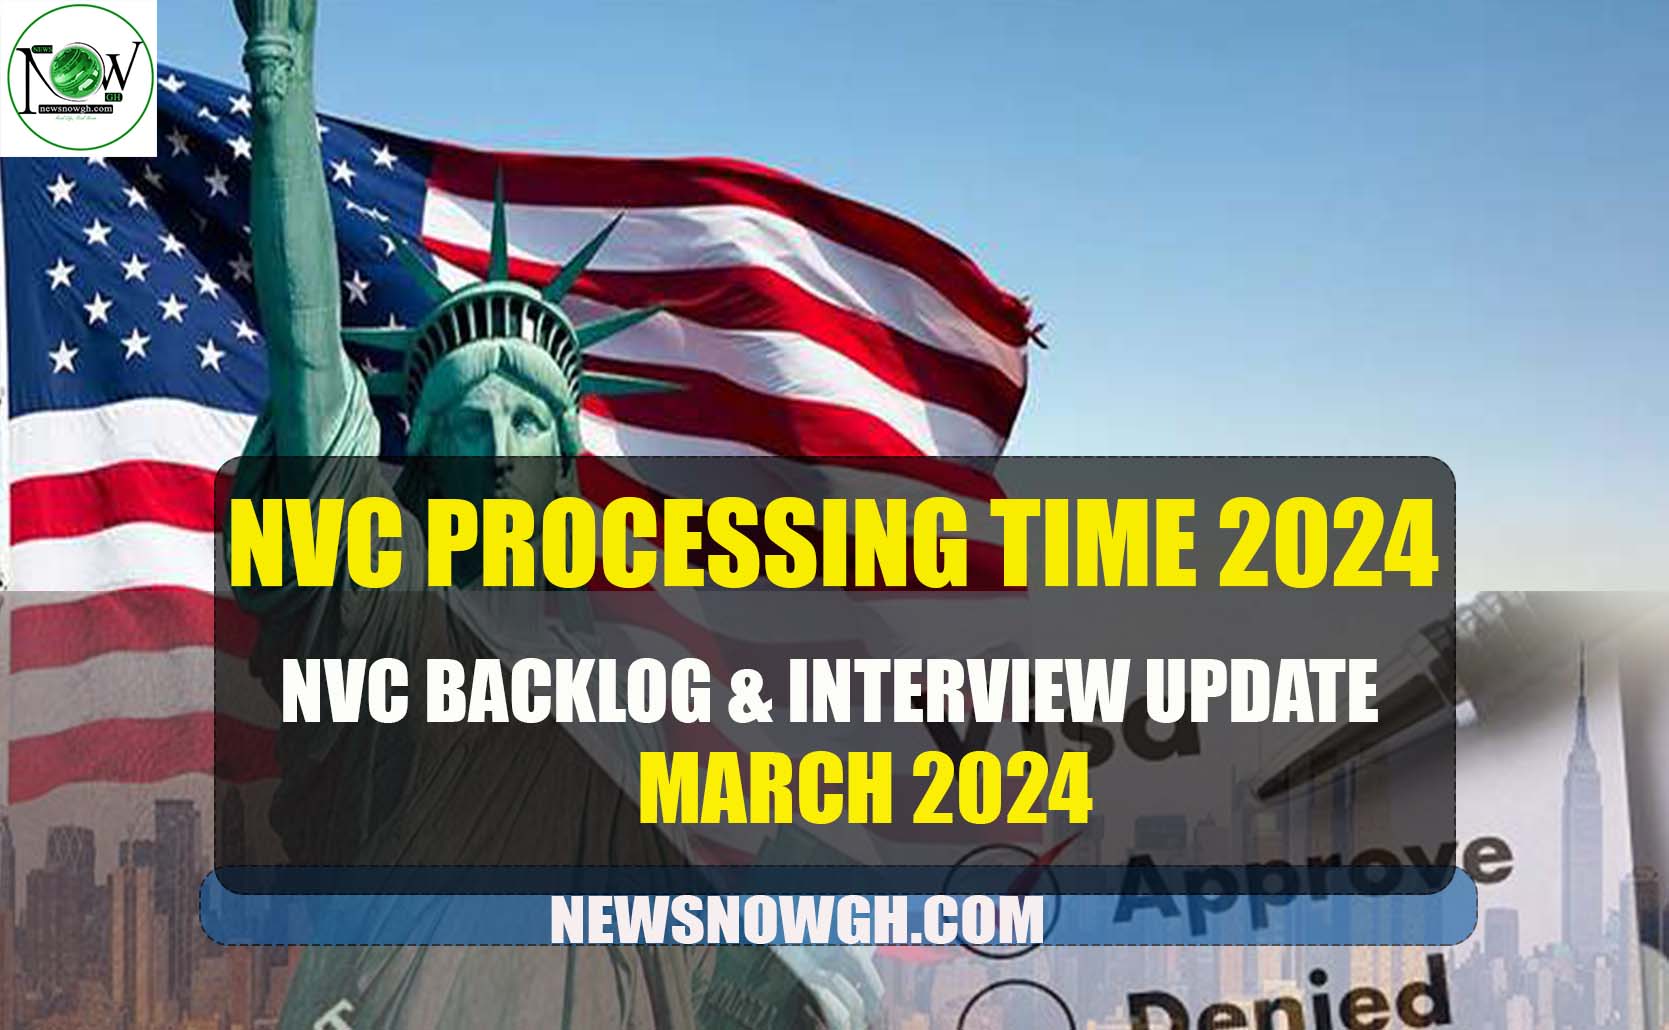 NVC Backlog & Interview Update March 2024 | NVC Processing Time 2024